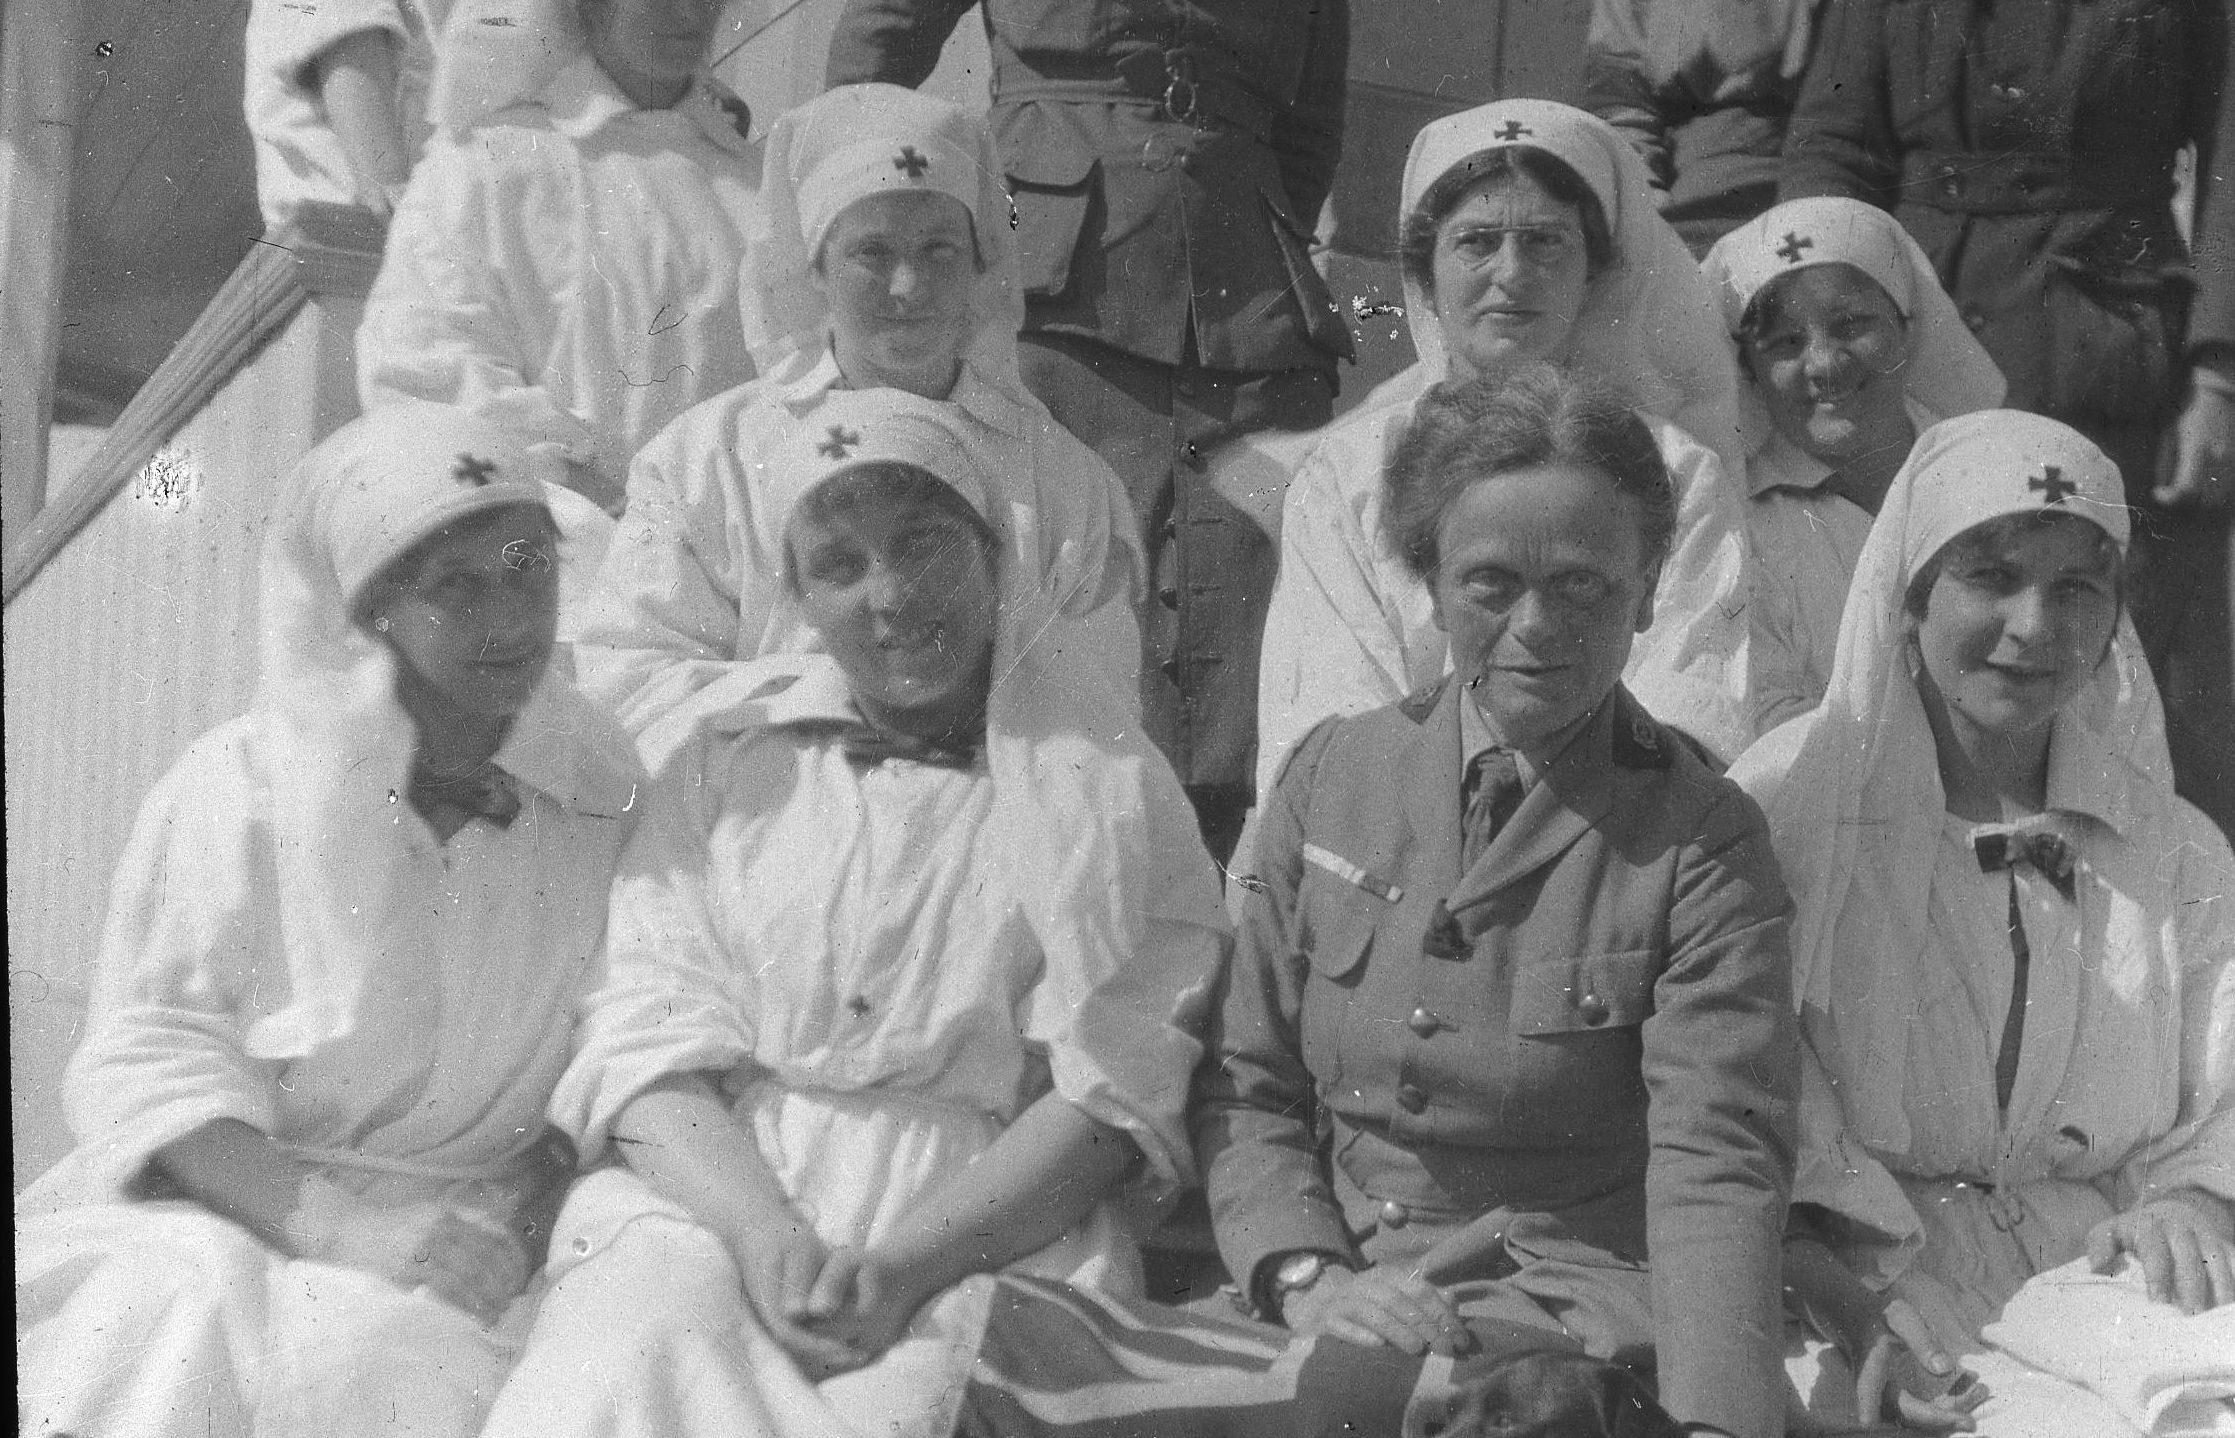 The Scottish Women’s Hospitals led by founder Dr Elsie Inglis, (bottom row, second from right), cared for wounded soldiers on the frontline